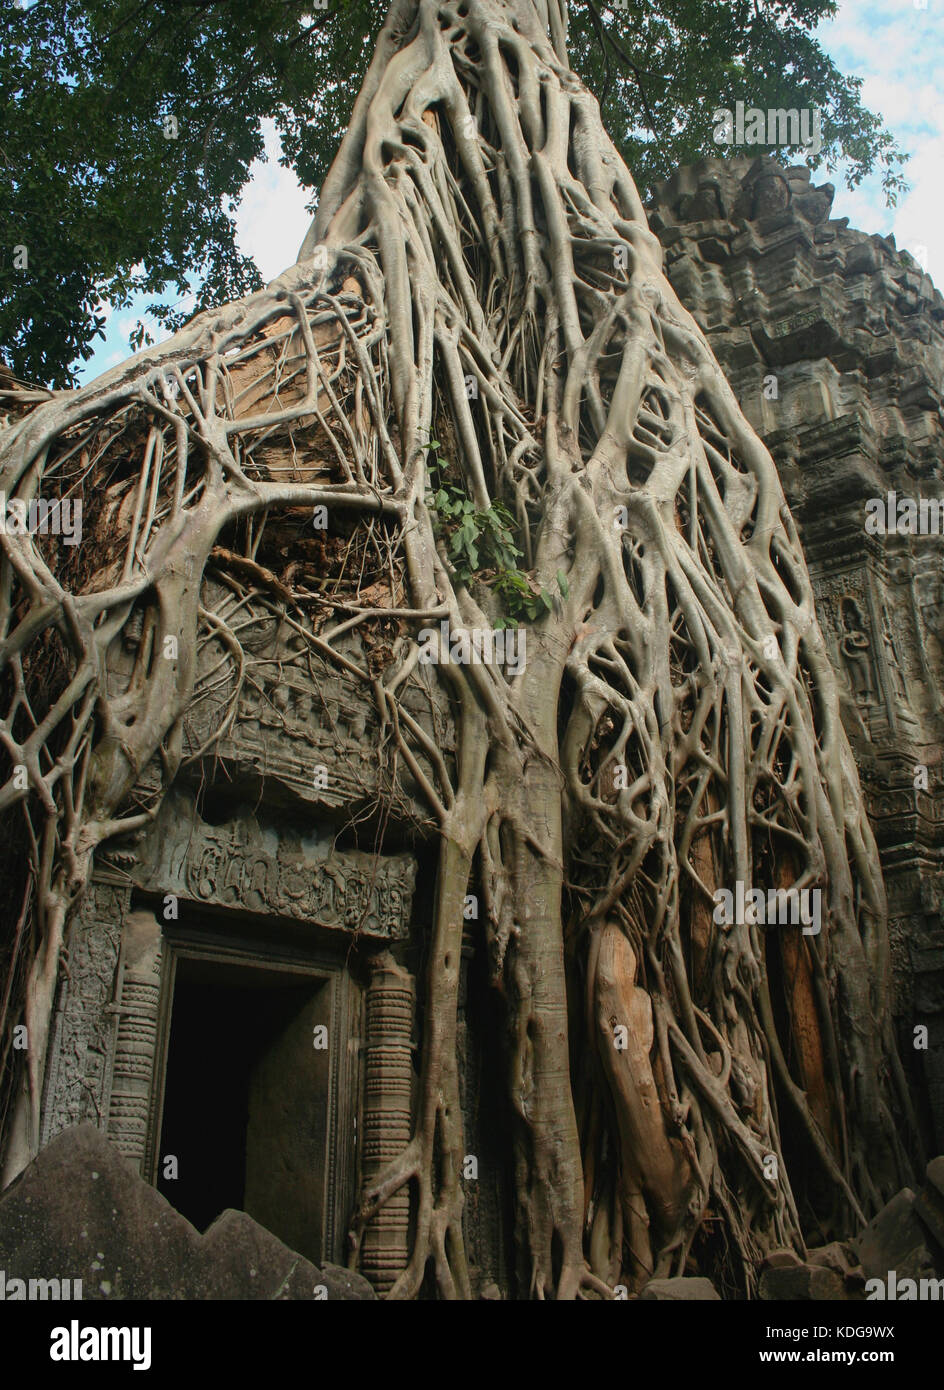 Tomb raider gate and a strangler fig (Ficus sp.) at the Ta Prohm temple in Angkor, Cambodia.  Ta Prohm used as a location in the film Tomb Raider. Stock Photo